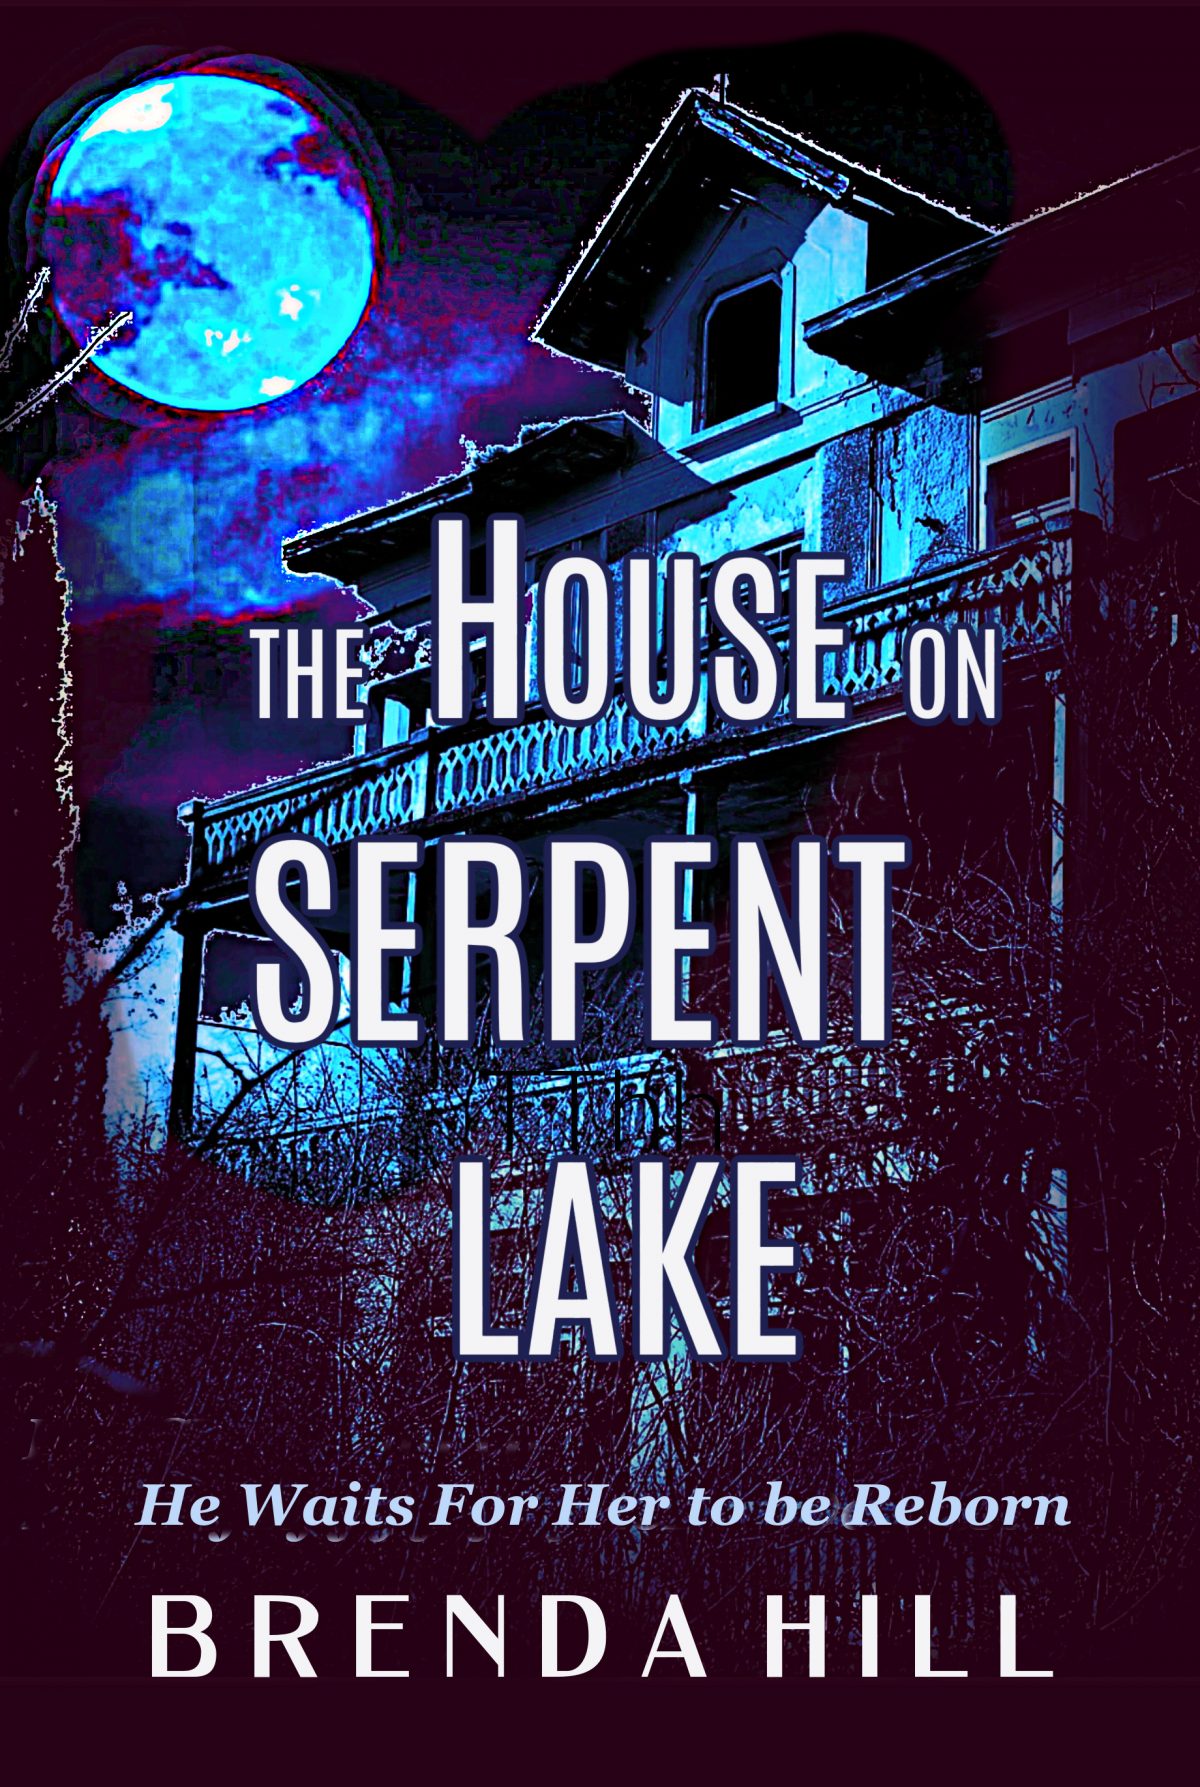 The House on Serpent Lake:  He Waits For Her to be Reborn